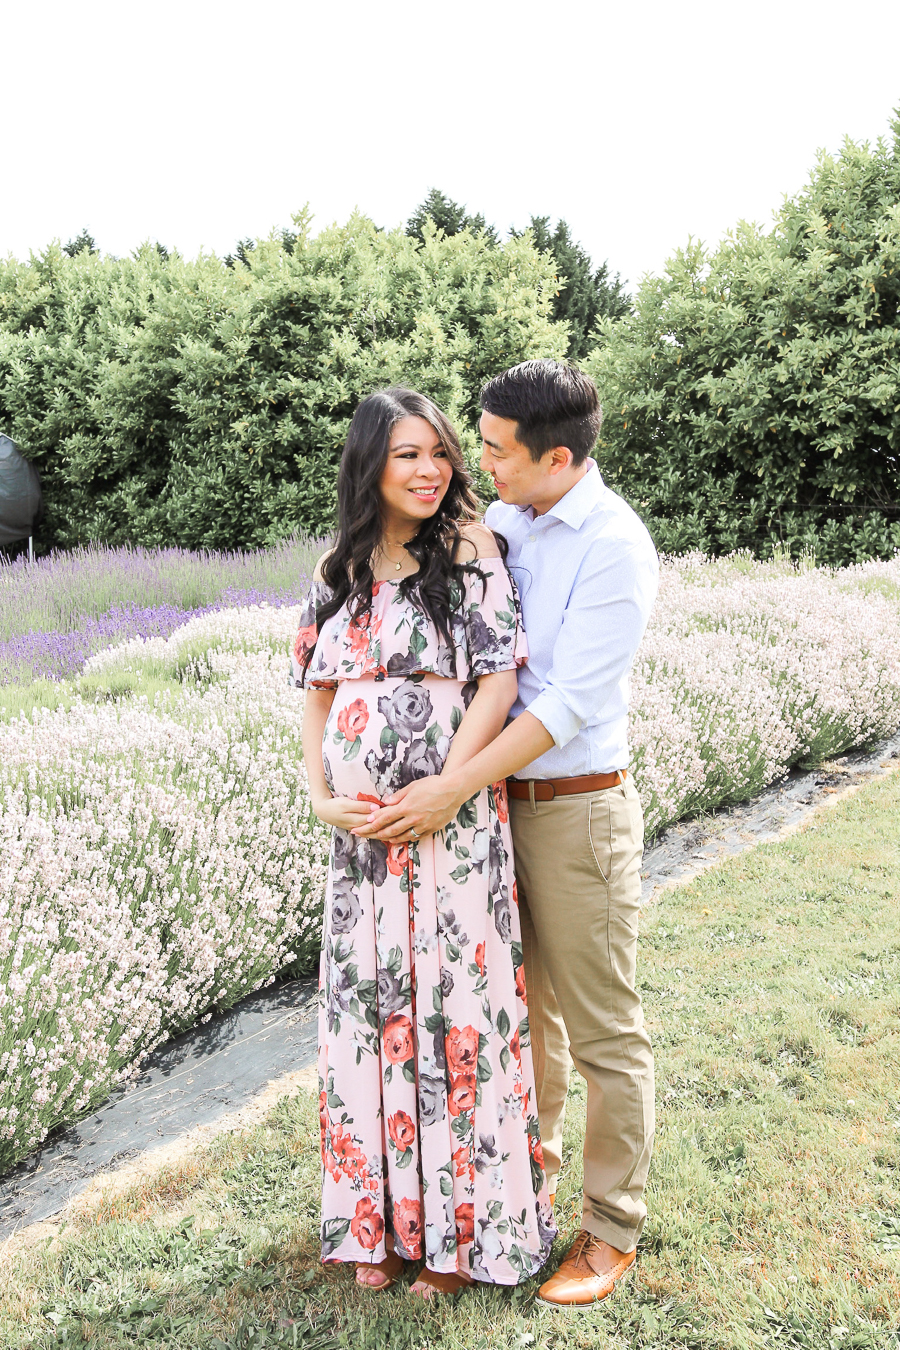 How to financially prepare for baby, maternity photoshoot at a lavender field in Olympia called Evergreen Valley Lavender Farm, wearing Pink Blush Maternity maxi dress with floral print and off the shoulder